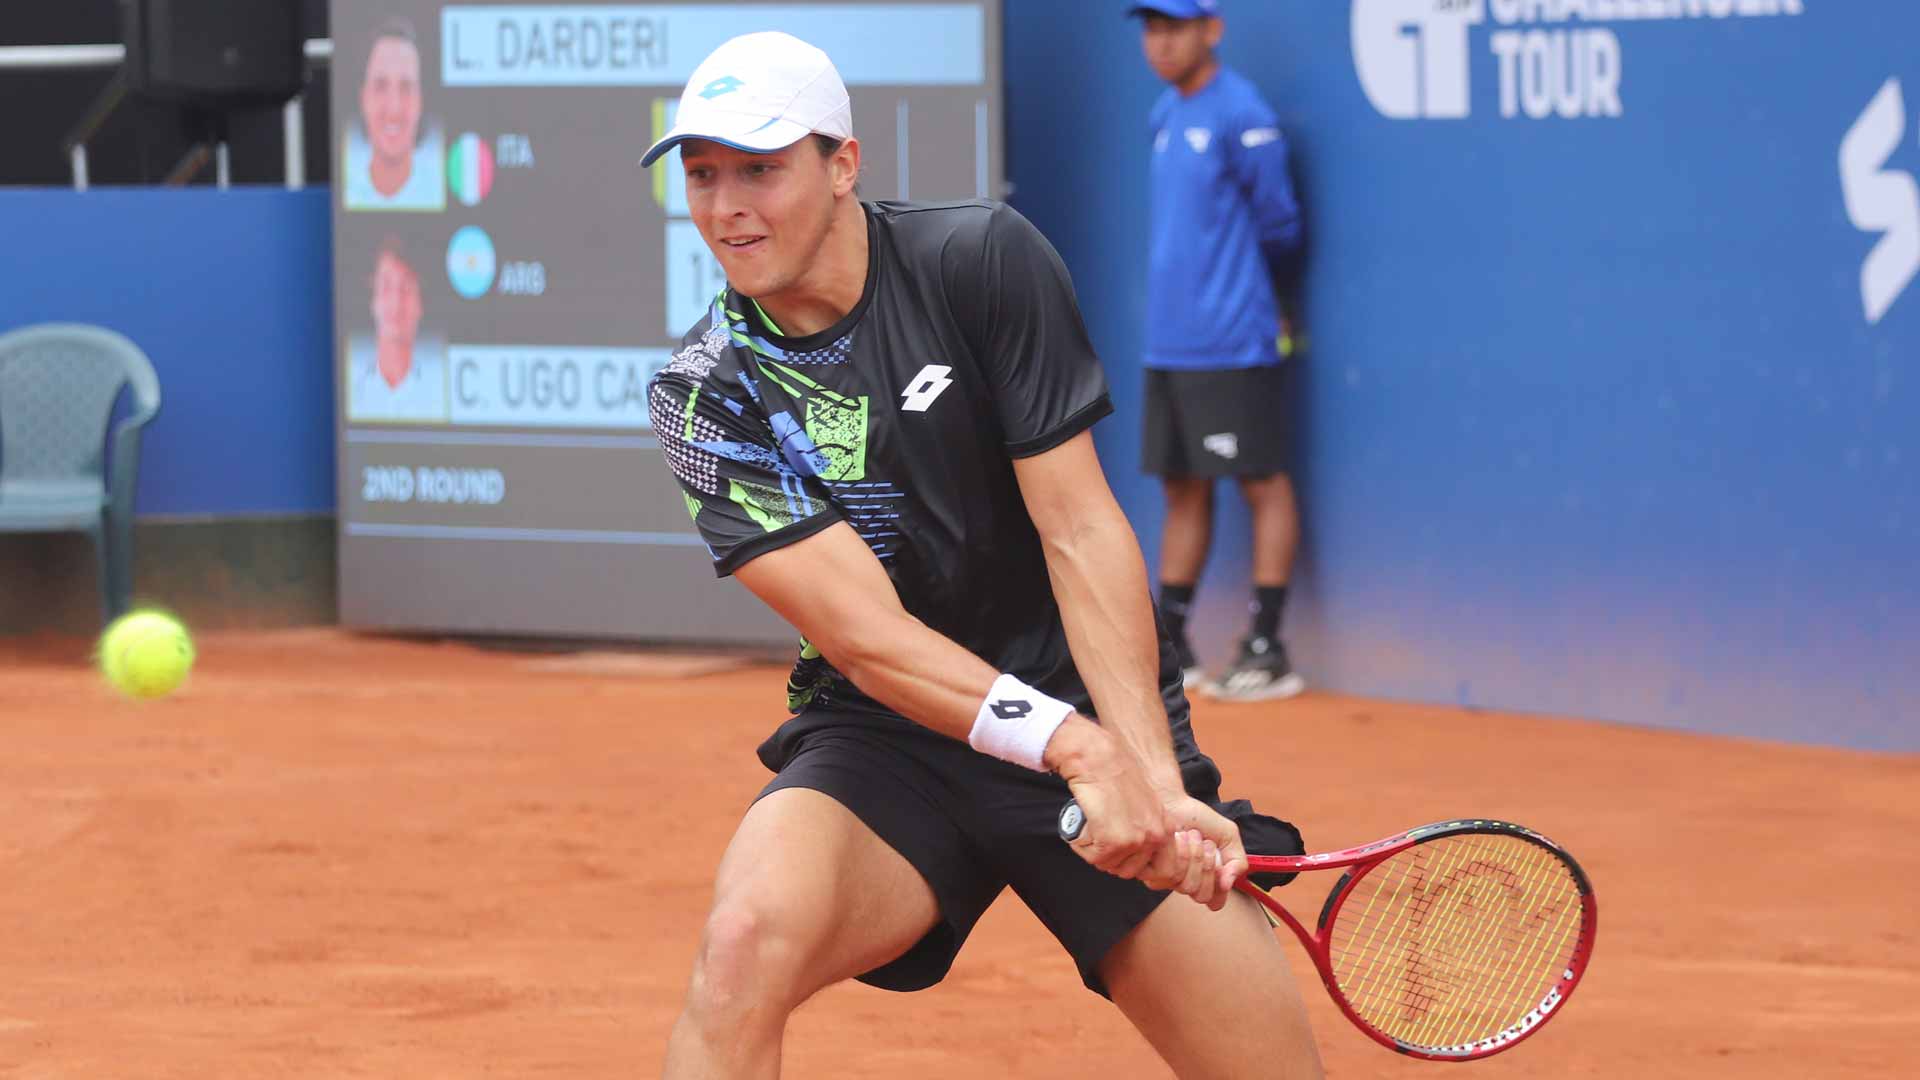 Luciano Darderi in action at the Directv Open Lima, where he won his second ATP Challenger Tour title.